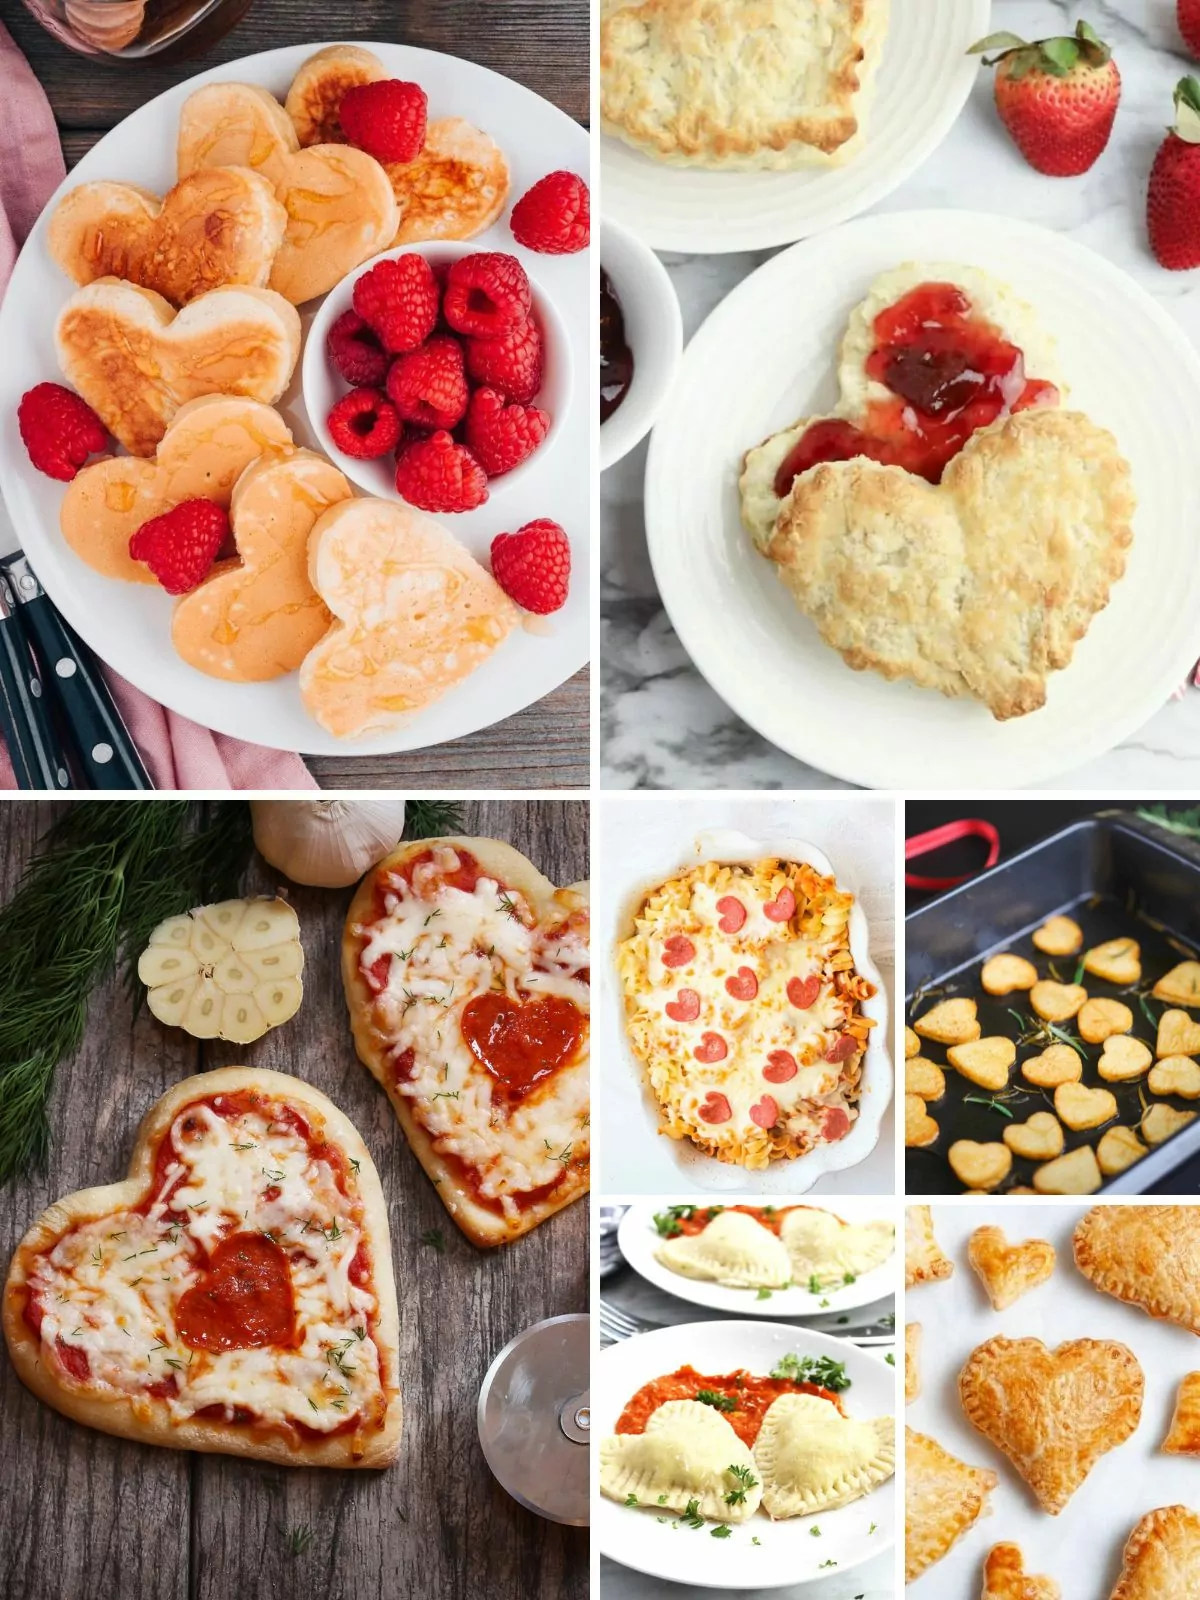 Recipes to serve for Valentine's Day that are heart shaped.